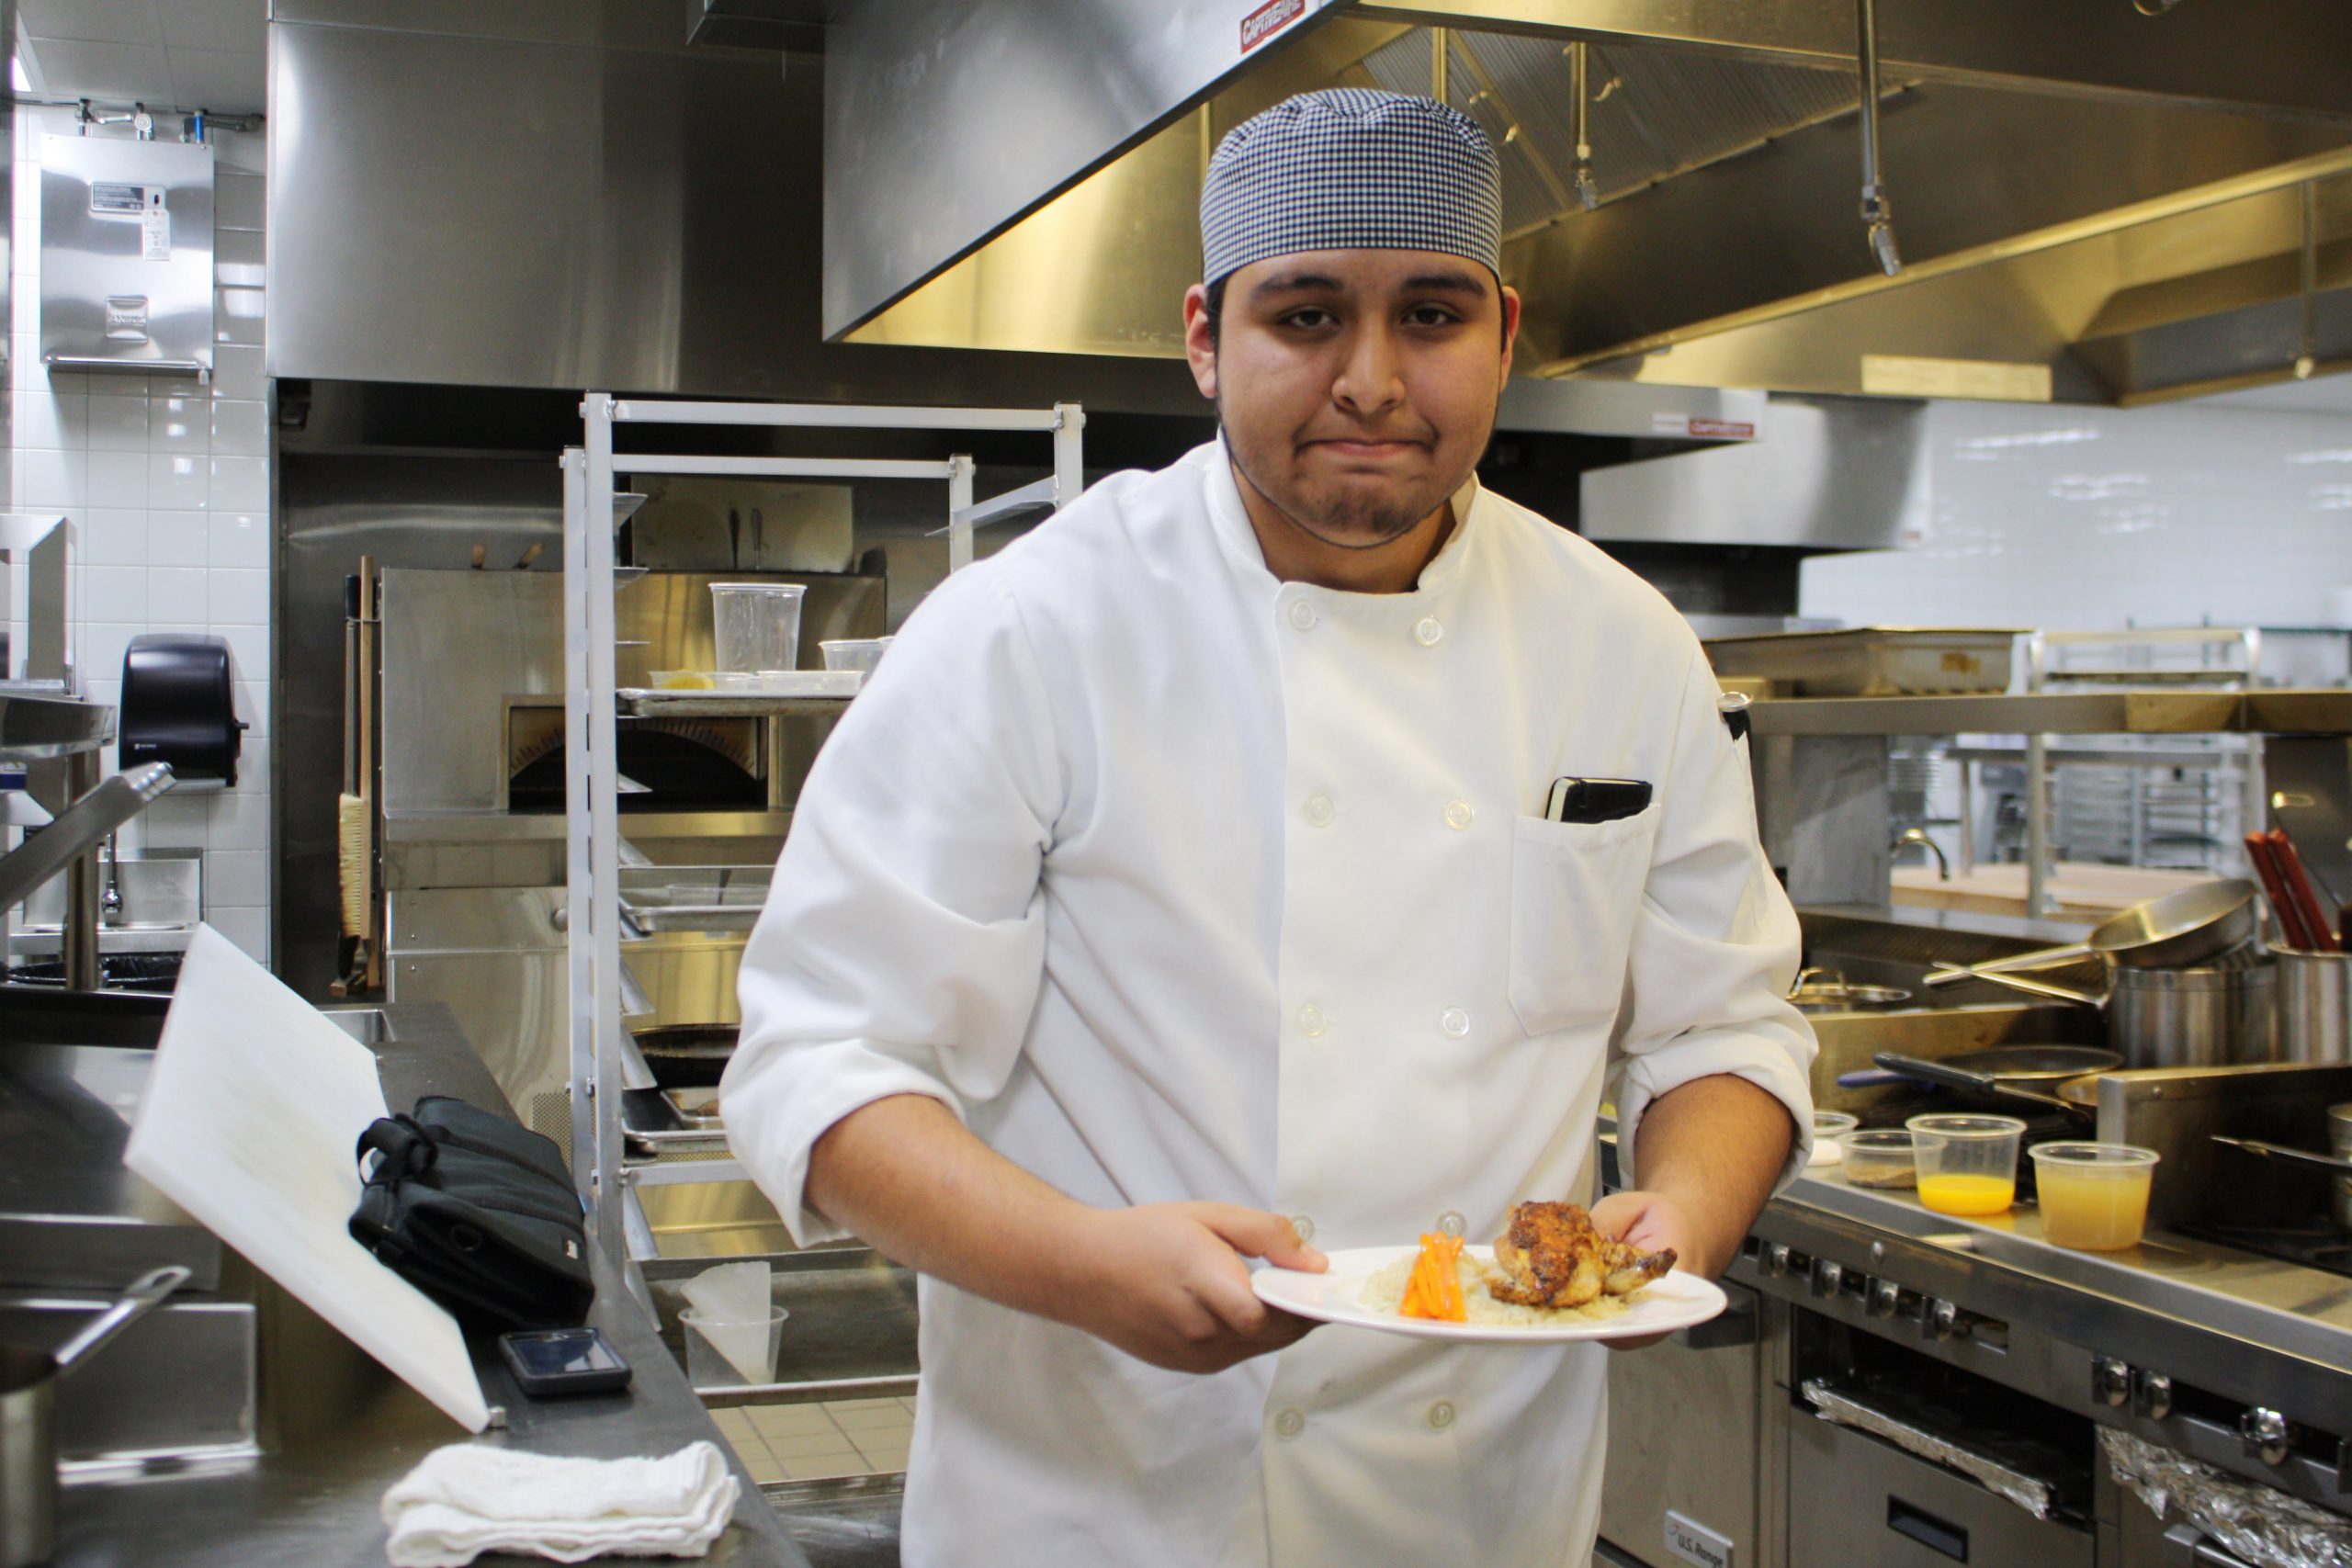 A Middle College student prepares a meal in the kitchens at Madison College